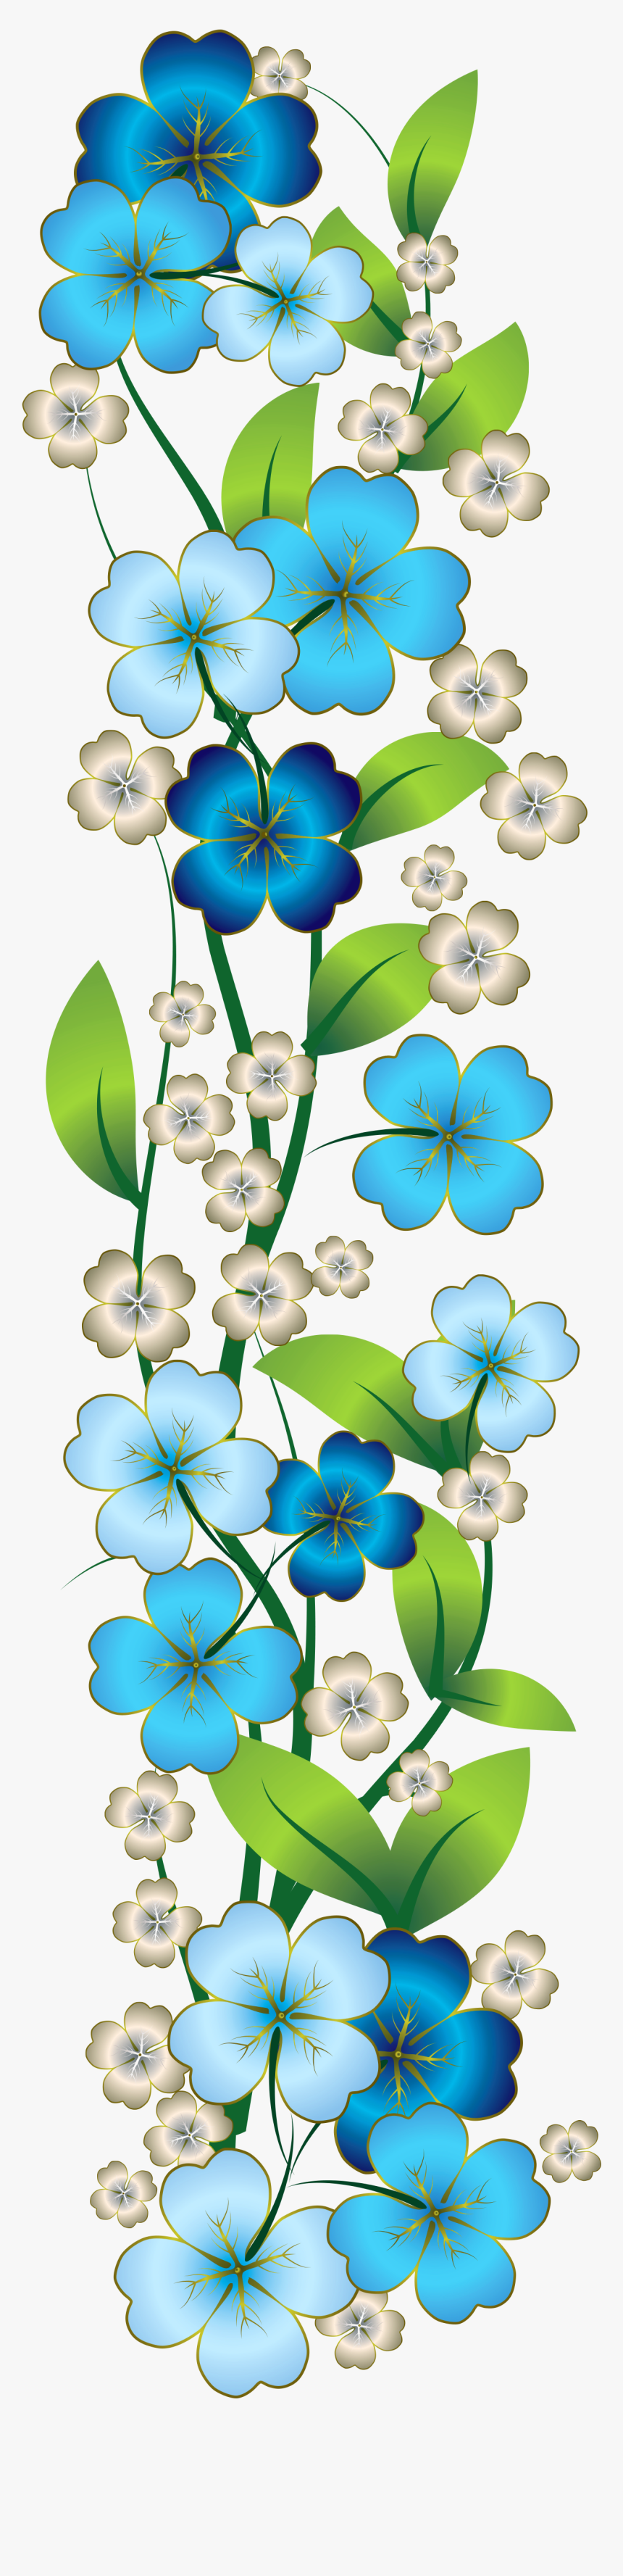 Clipart Borders Blue Flower - Blue Flower Border Clipart, HD Png Download, Free Download